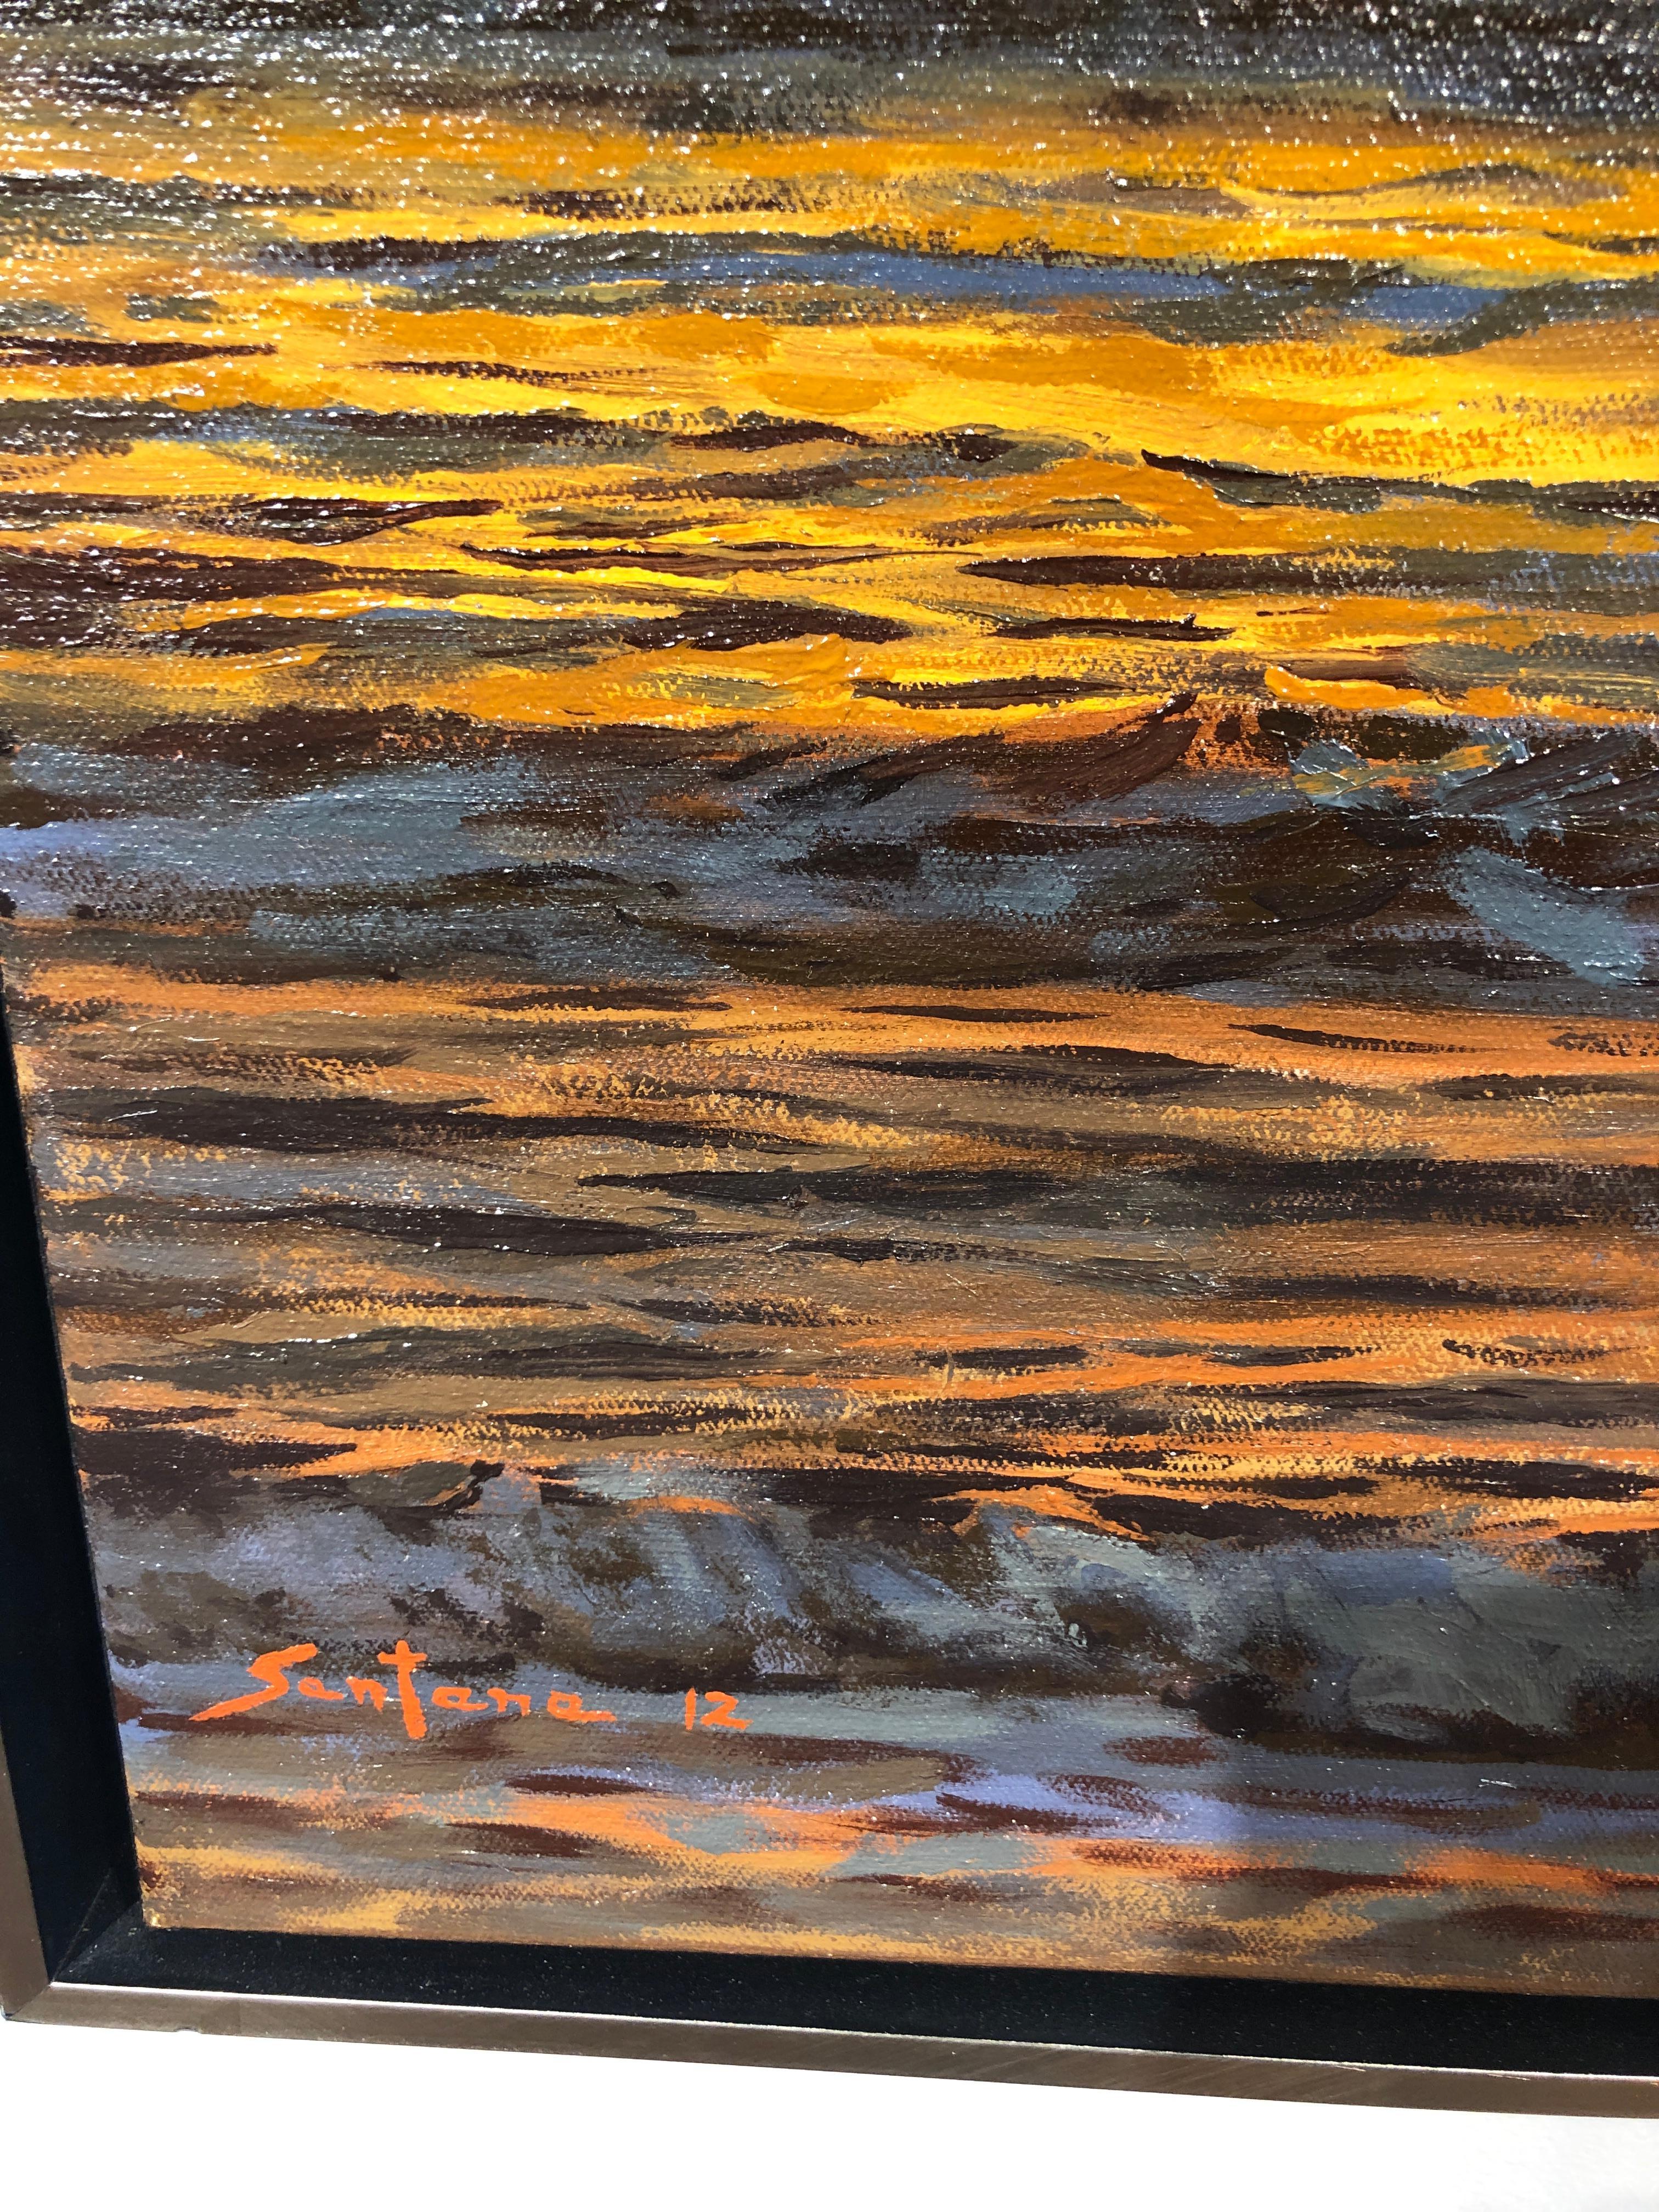 Oceans XIV - Original Oil Painting of Golden Sunset Reflected on Water 4